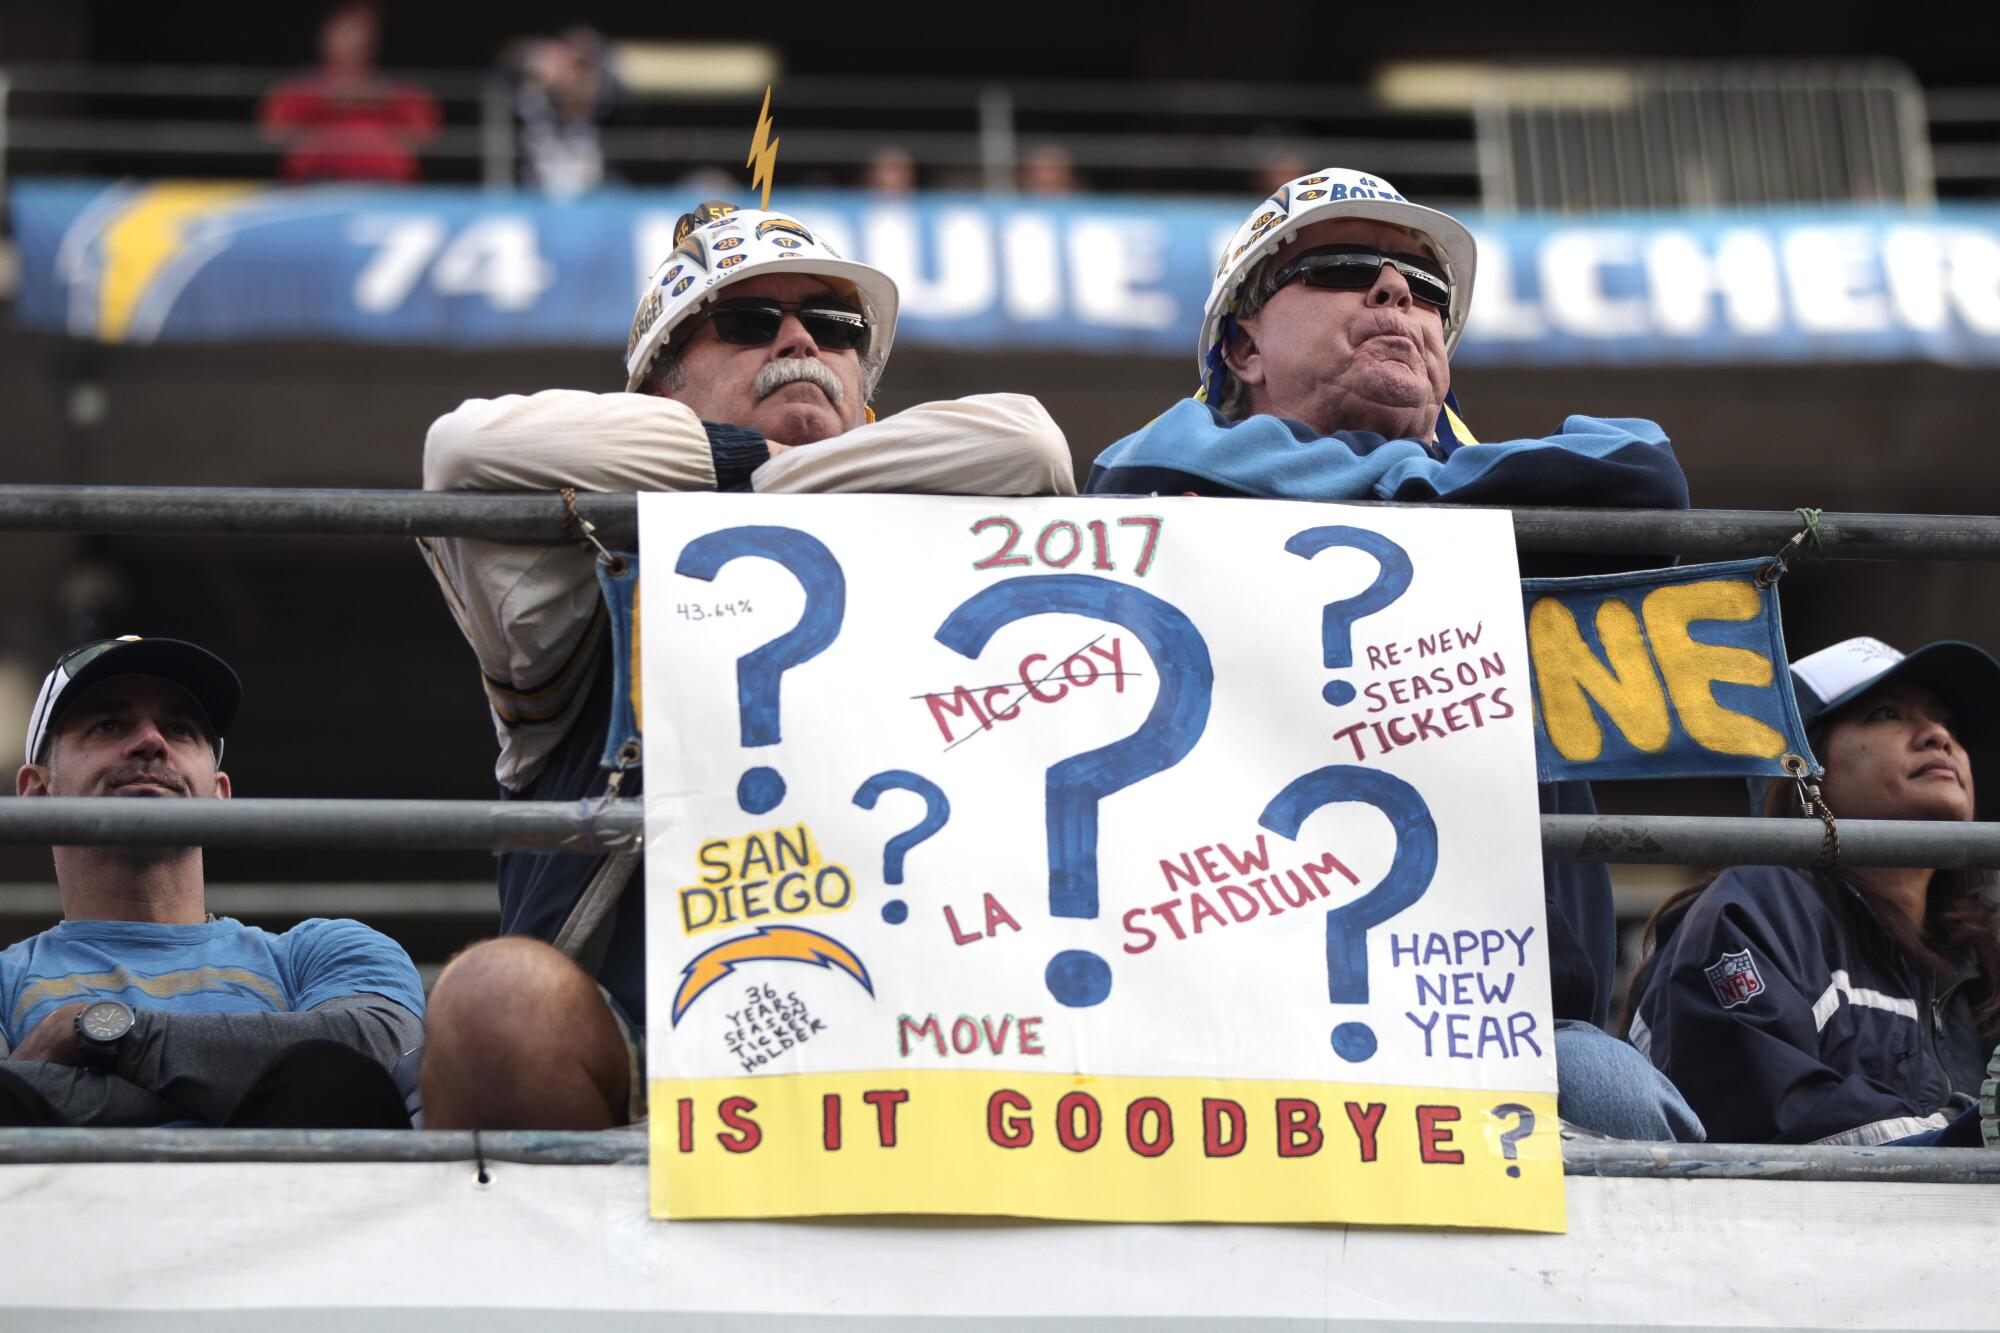 Two Chargers fans sit behind their sign during the second half of the Chargers vs. Kansas City game at Qualcomm Stadium.